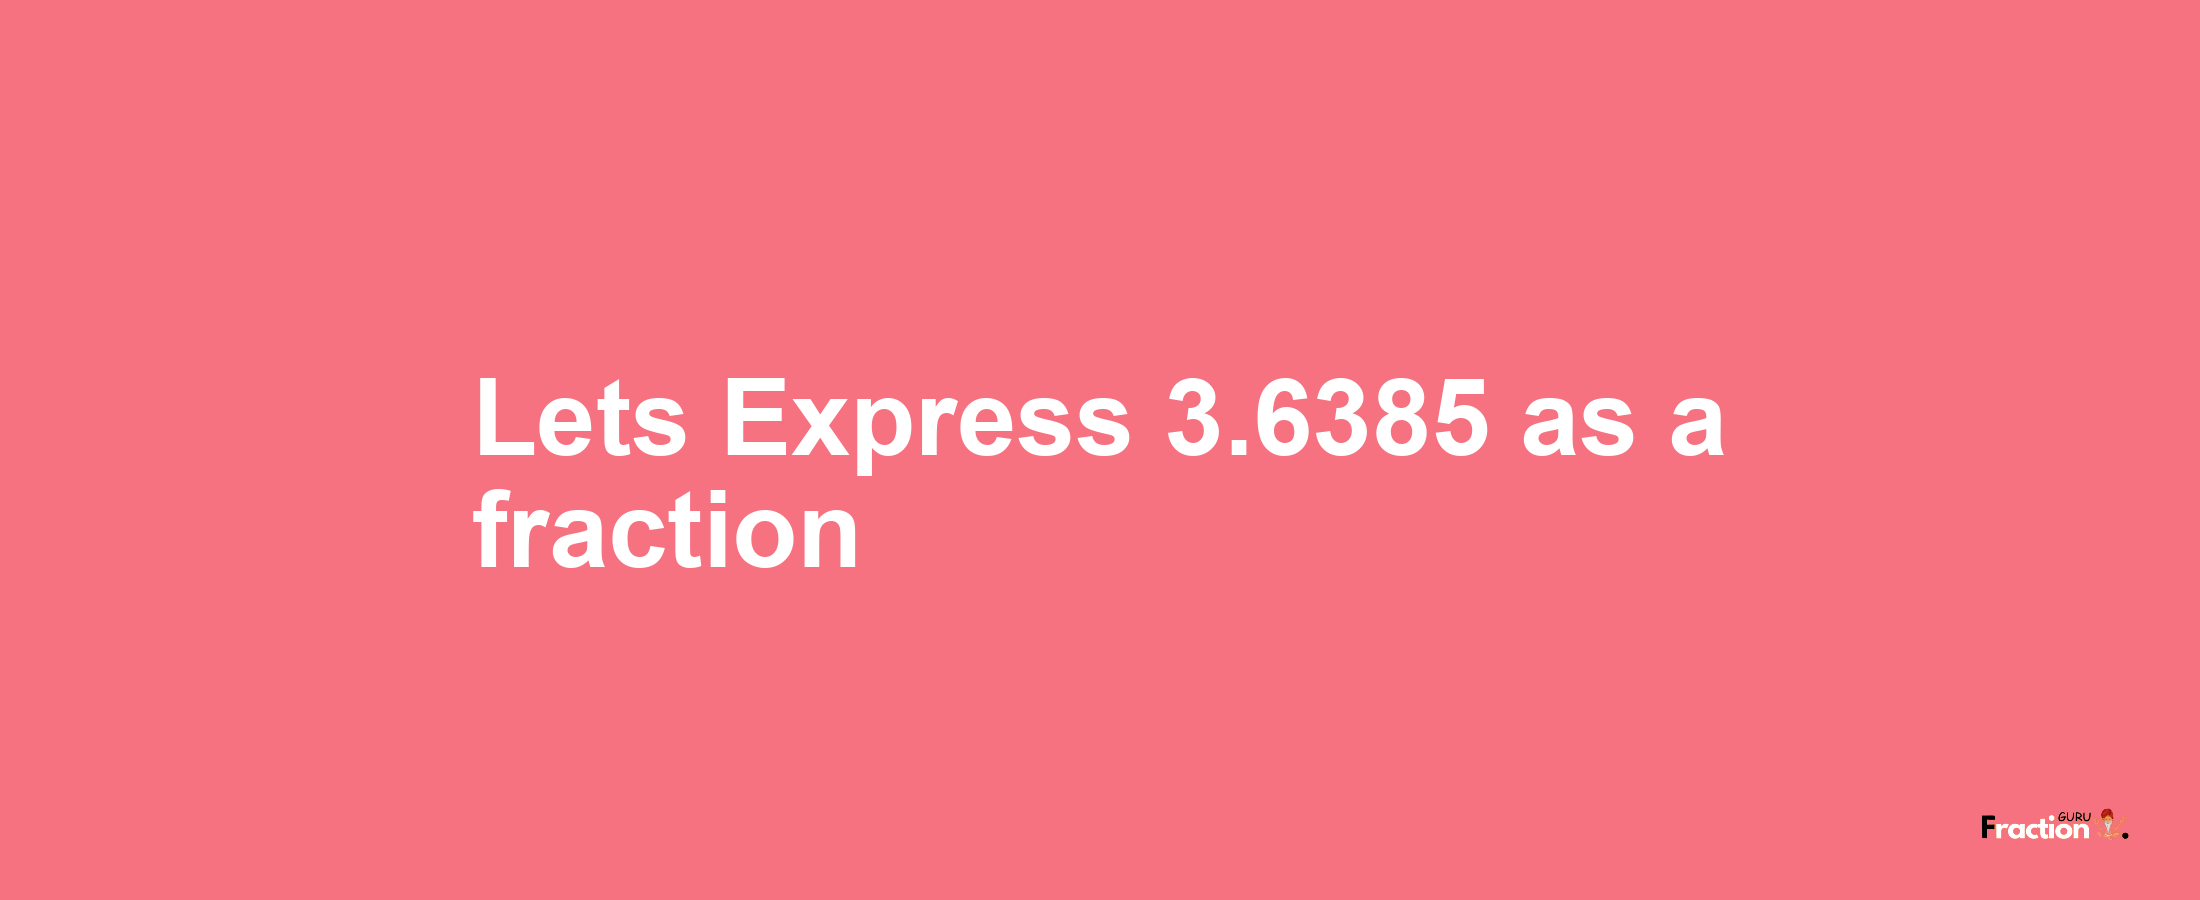 Lets Express 3.6385 as afraction